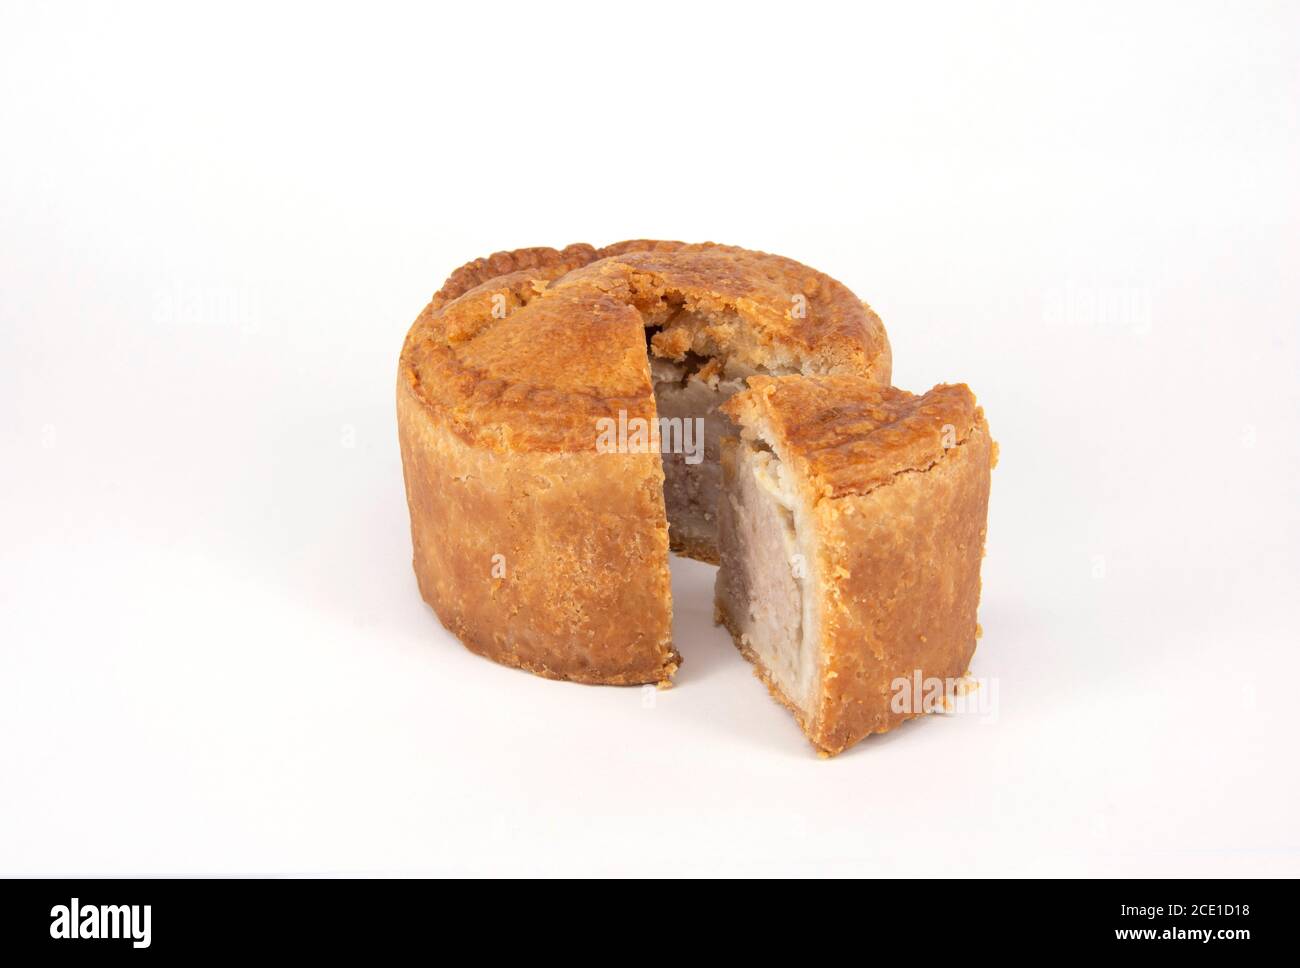 STILL-Life of British Pork pie, Leicestershire, Angleterre, Royaume-Uni Banque D'Images